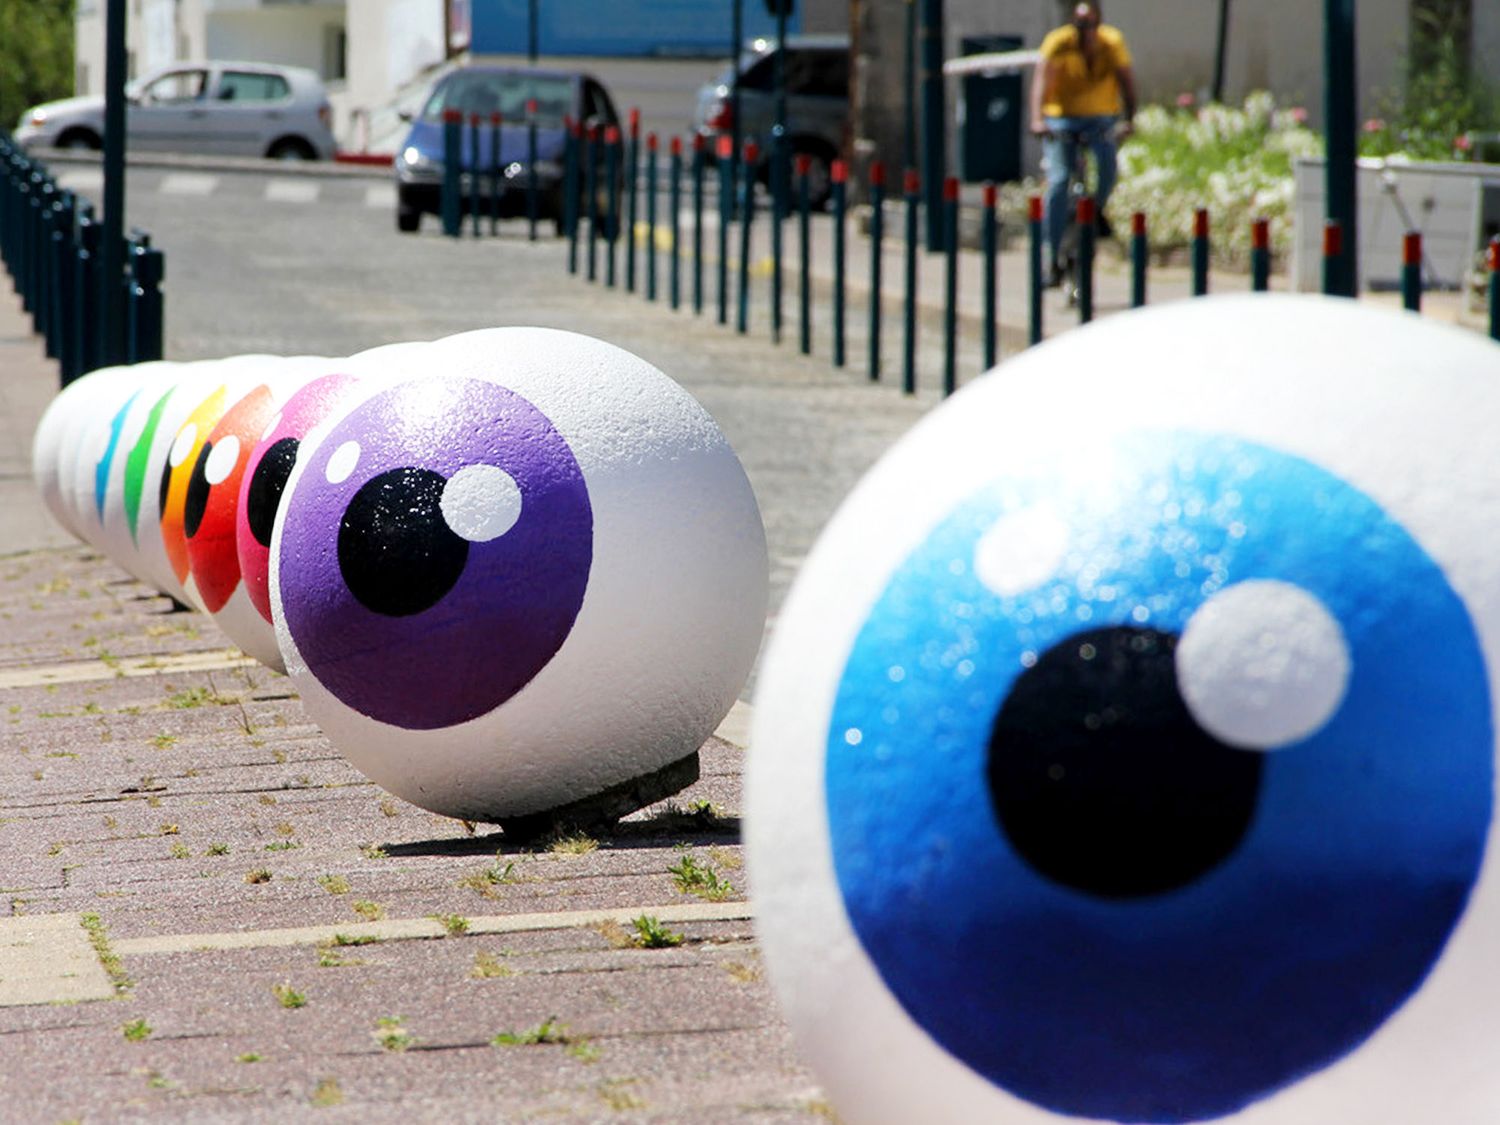 The eye of CyKlop is declined under various forms to better observe the passers-by. Here, the "Eye Balls" commissioned by the city of Pantin and realized on the banks of the Ourcq canal in Paris.